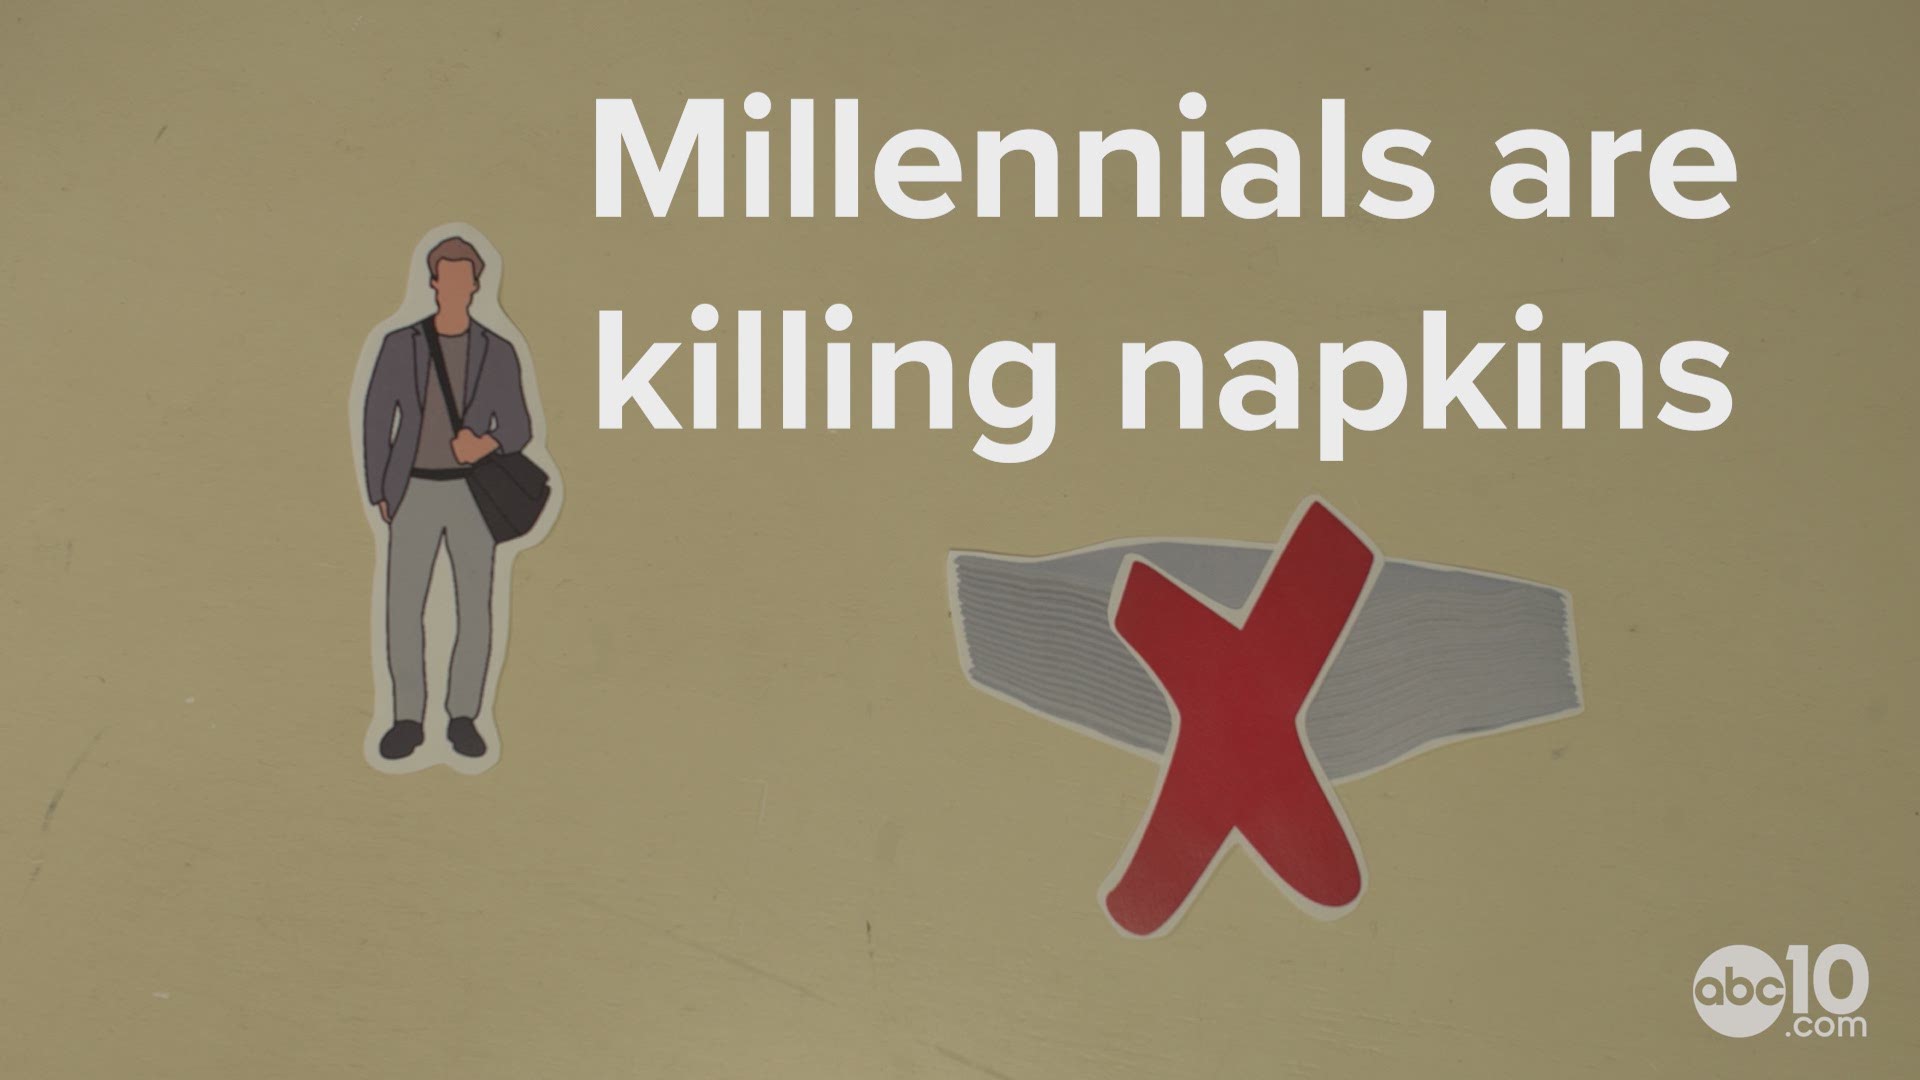 Paper napkins are a one-use tool and they are not convenient for millennials.